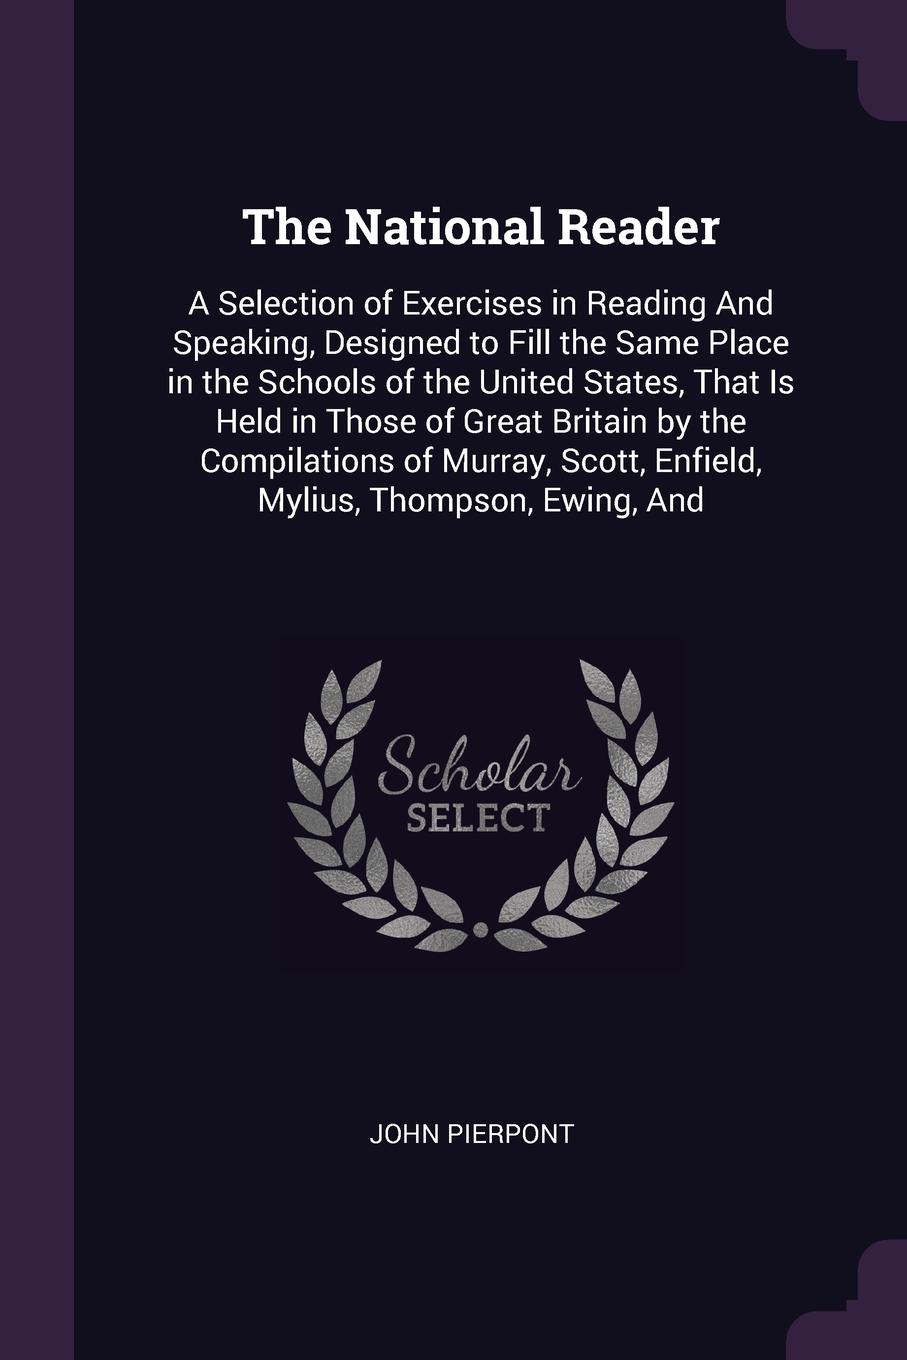 The National Reader. A Selection of Exercises in Reading And Speaking, Designed to Fill the Same Place in the Schools of the United States, That Is Held in Those of Great Britain by the Compilations of Murray, Scott, Enfield, Mylius, Thompson, Ewi...